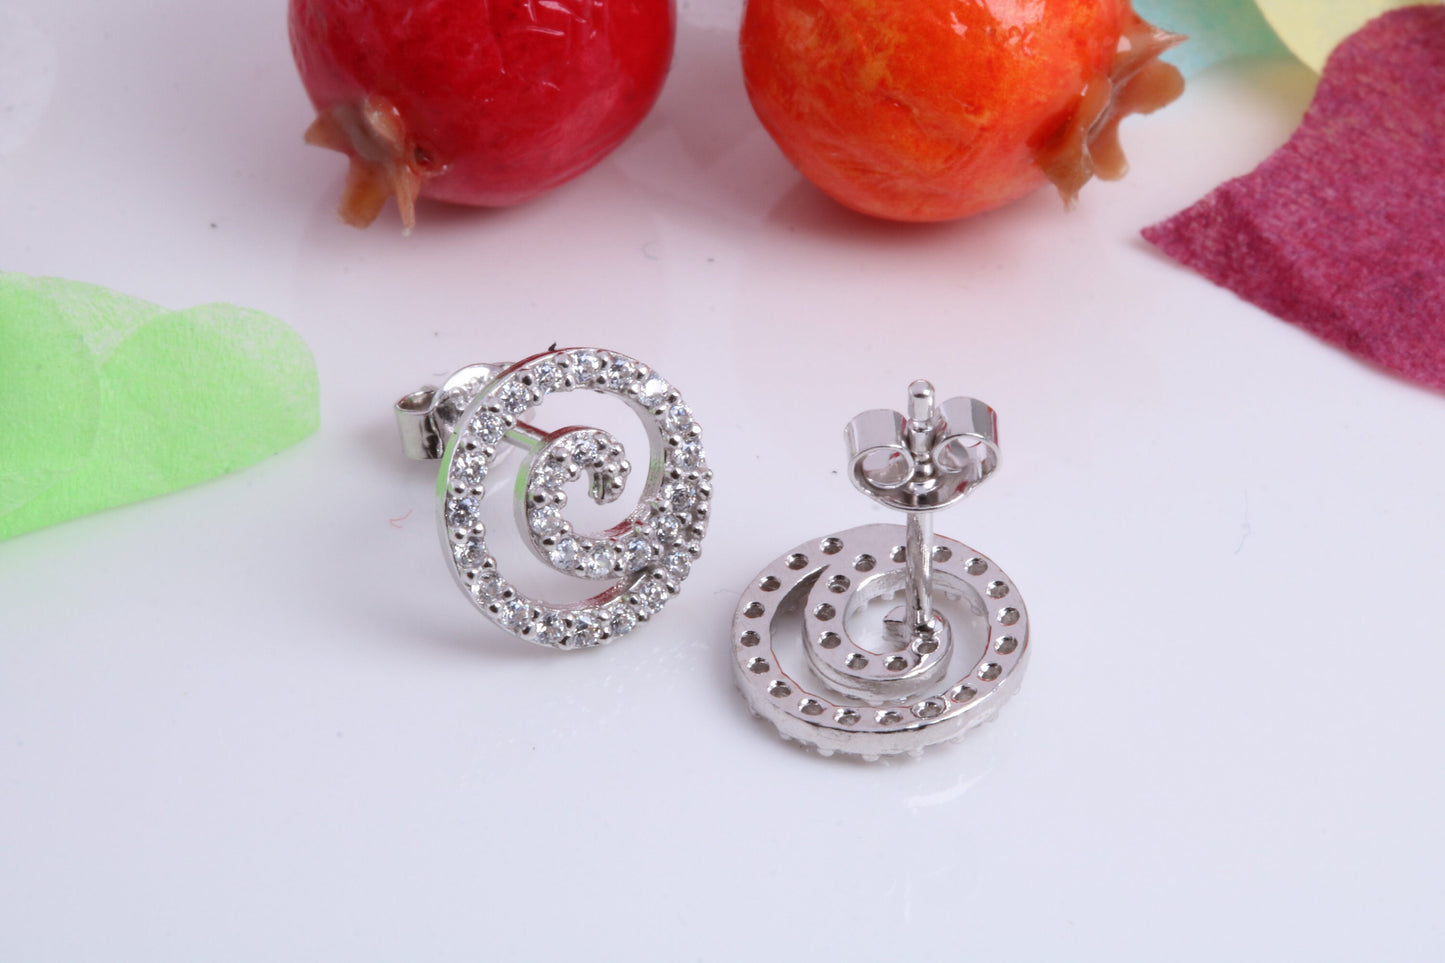 10 mm Round Swirl Cubic Zirconia set Earrings, Very Dressy, Made from Solid 925 Grade Sterling Silver